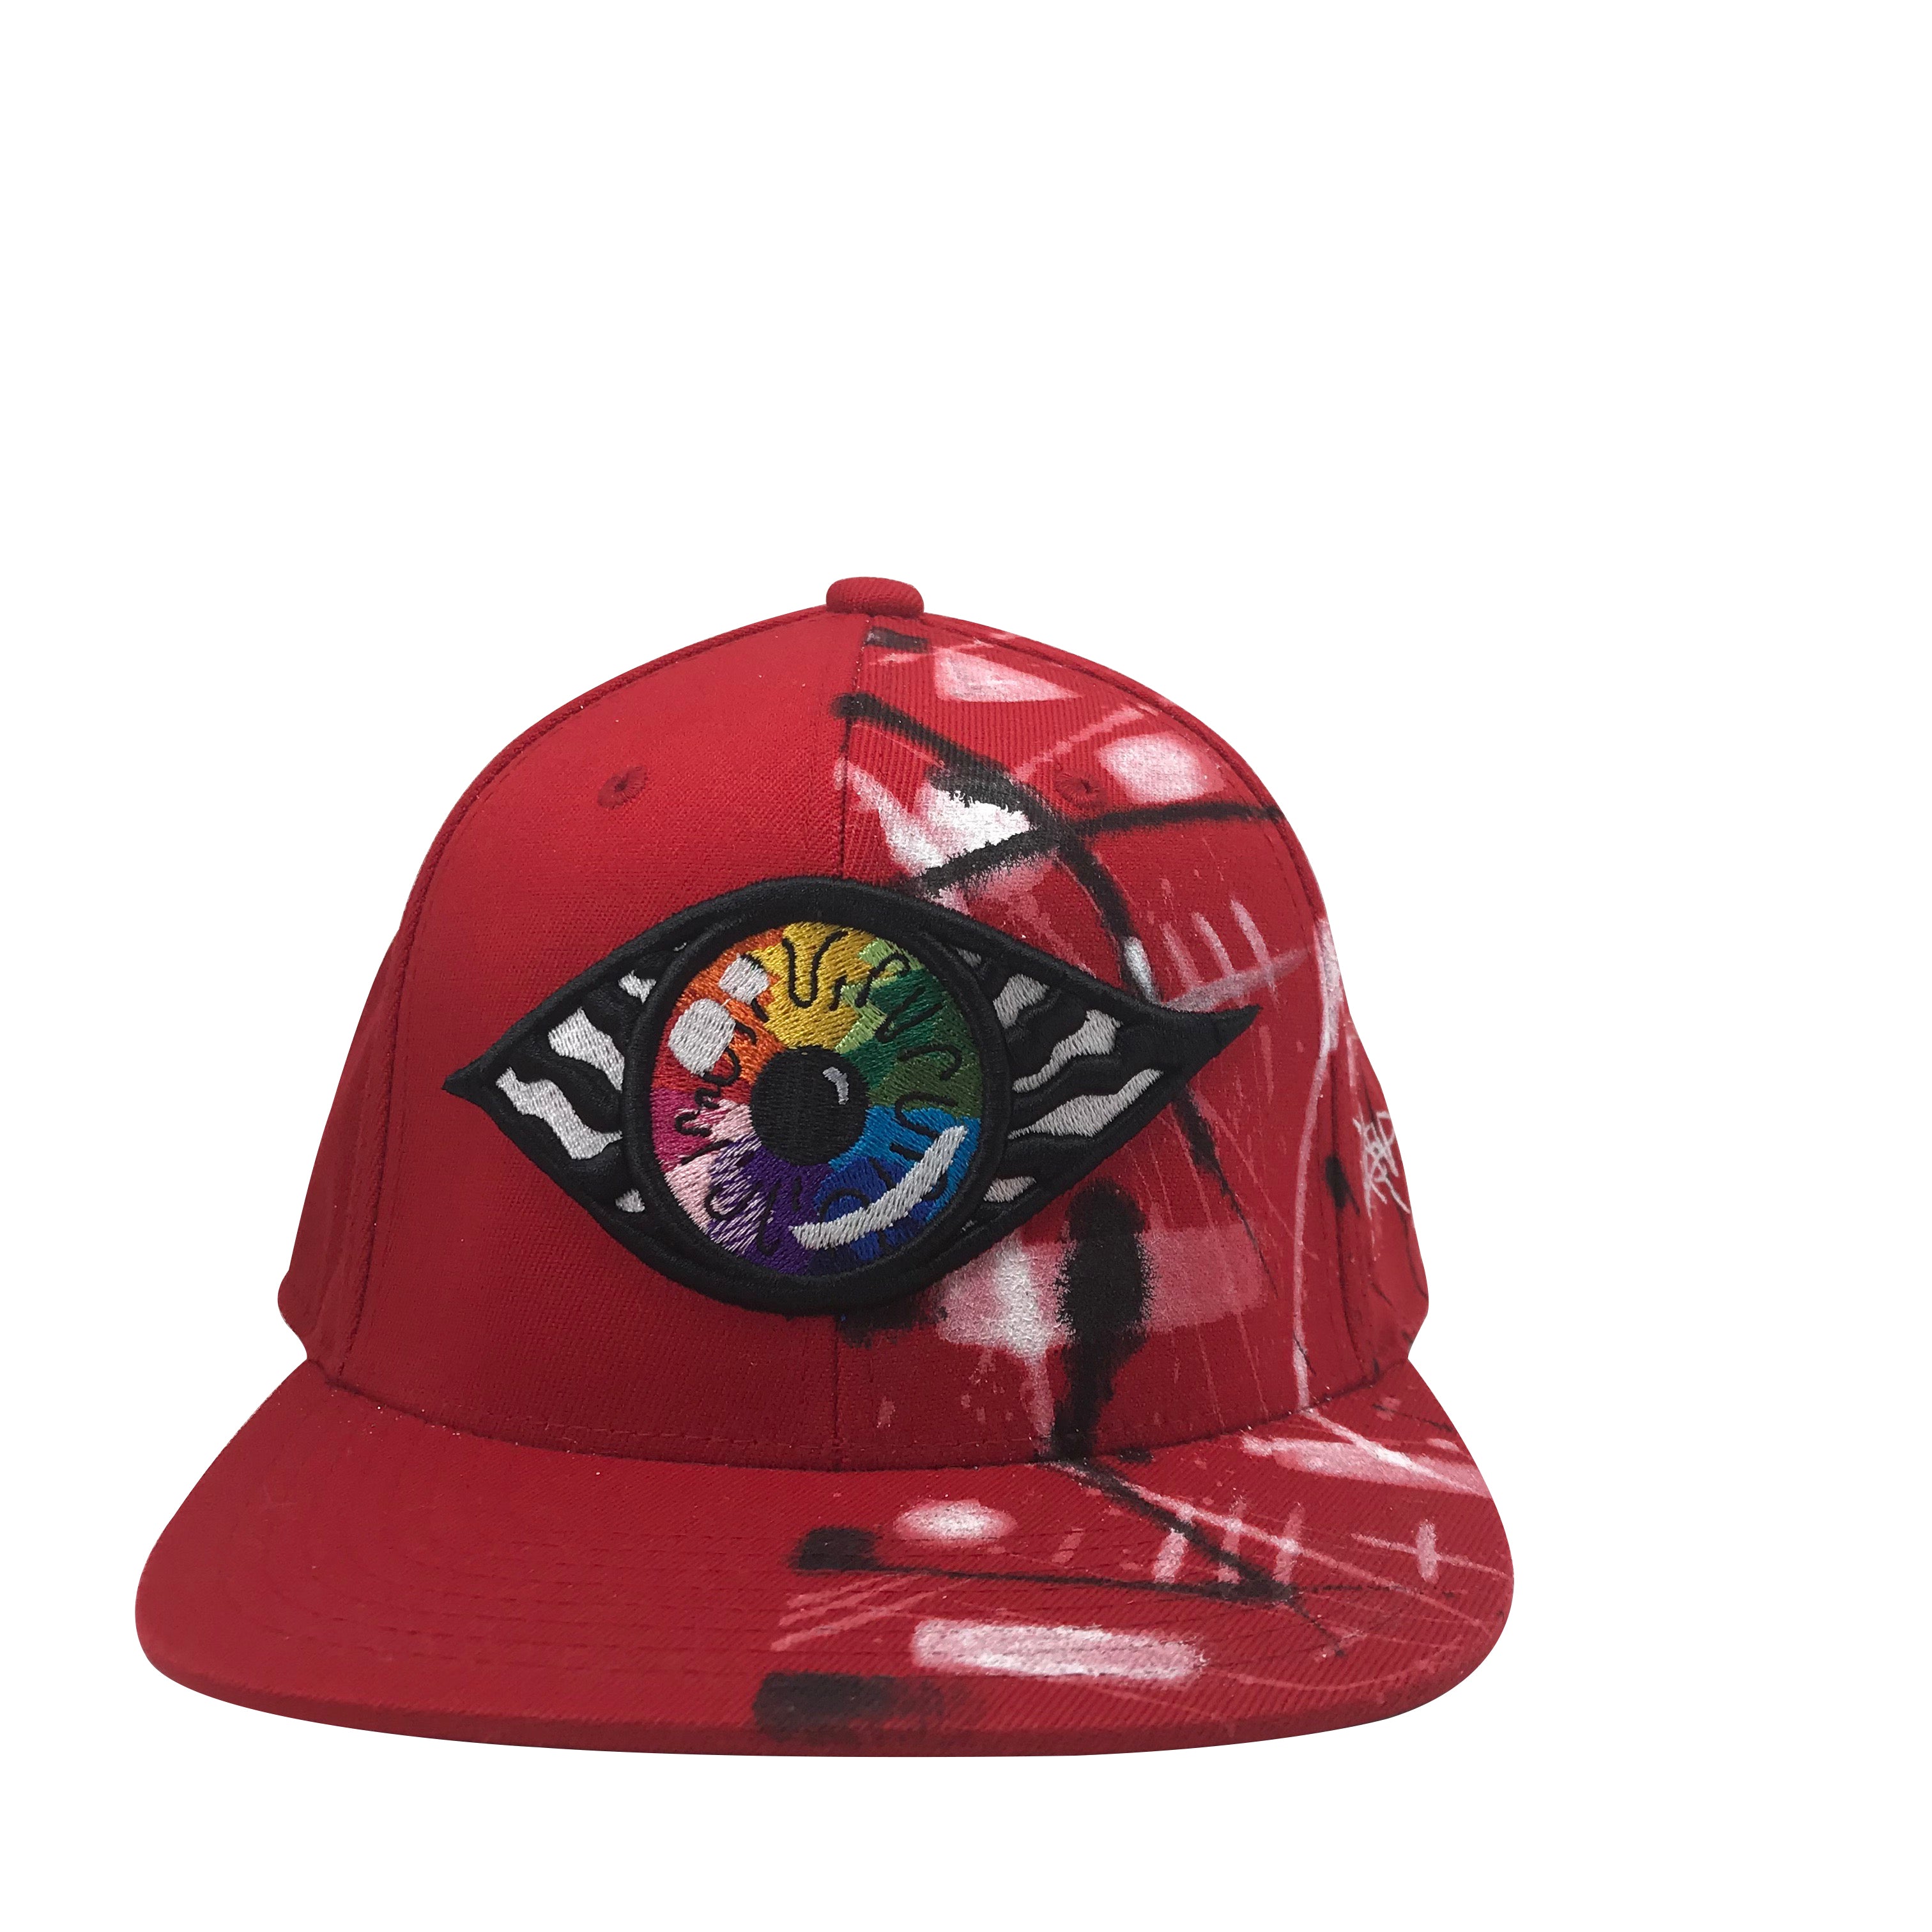 Hat - Unique hand painted / Red-B&W-Rainbow